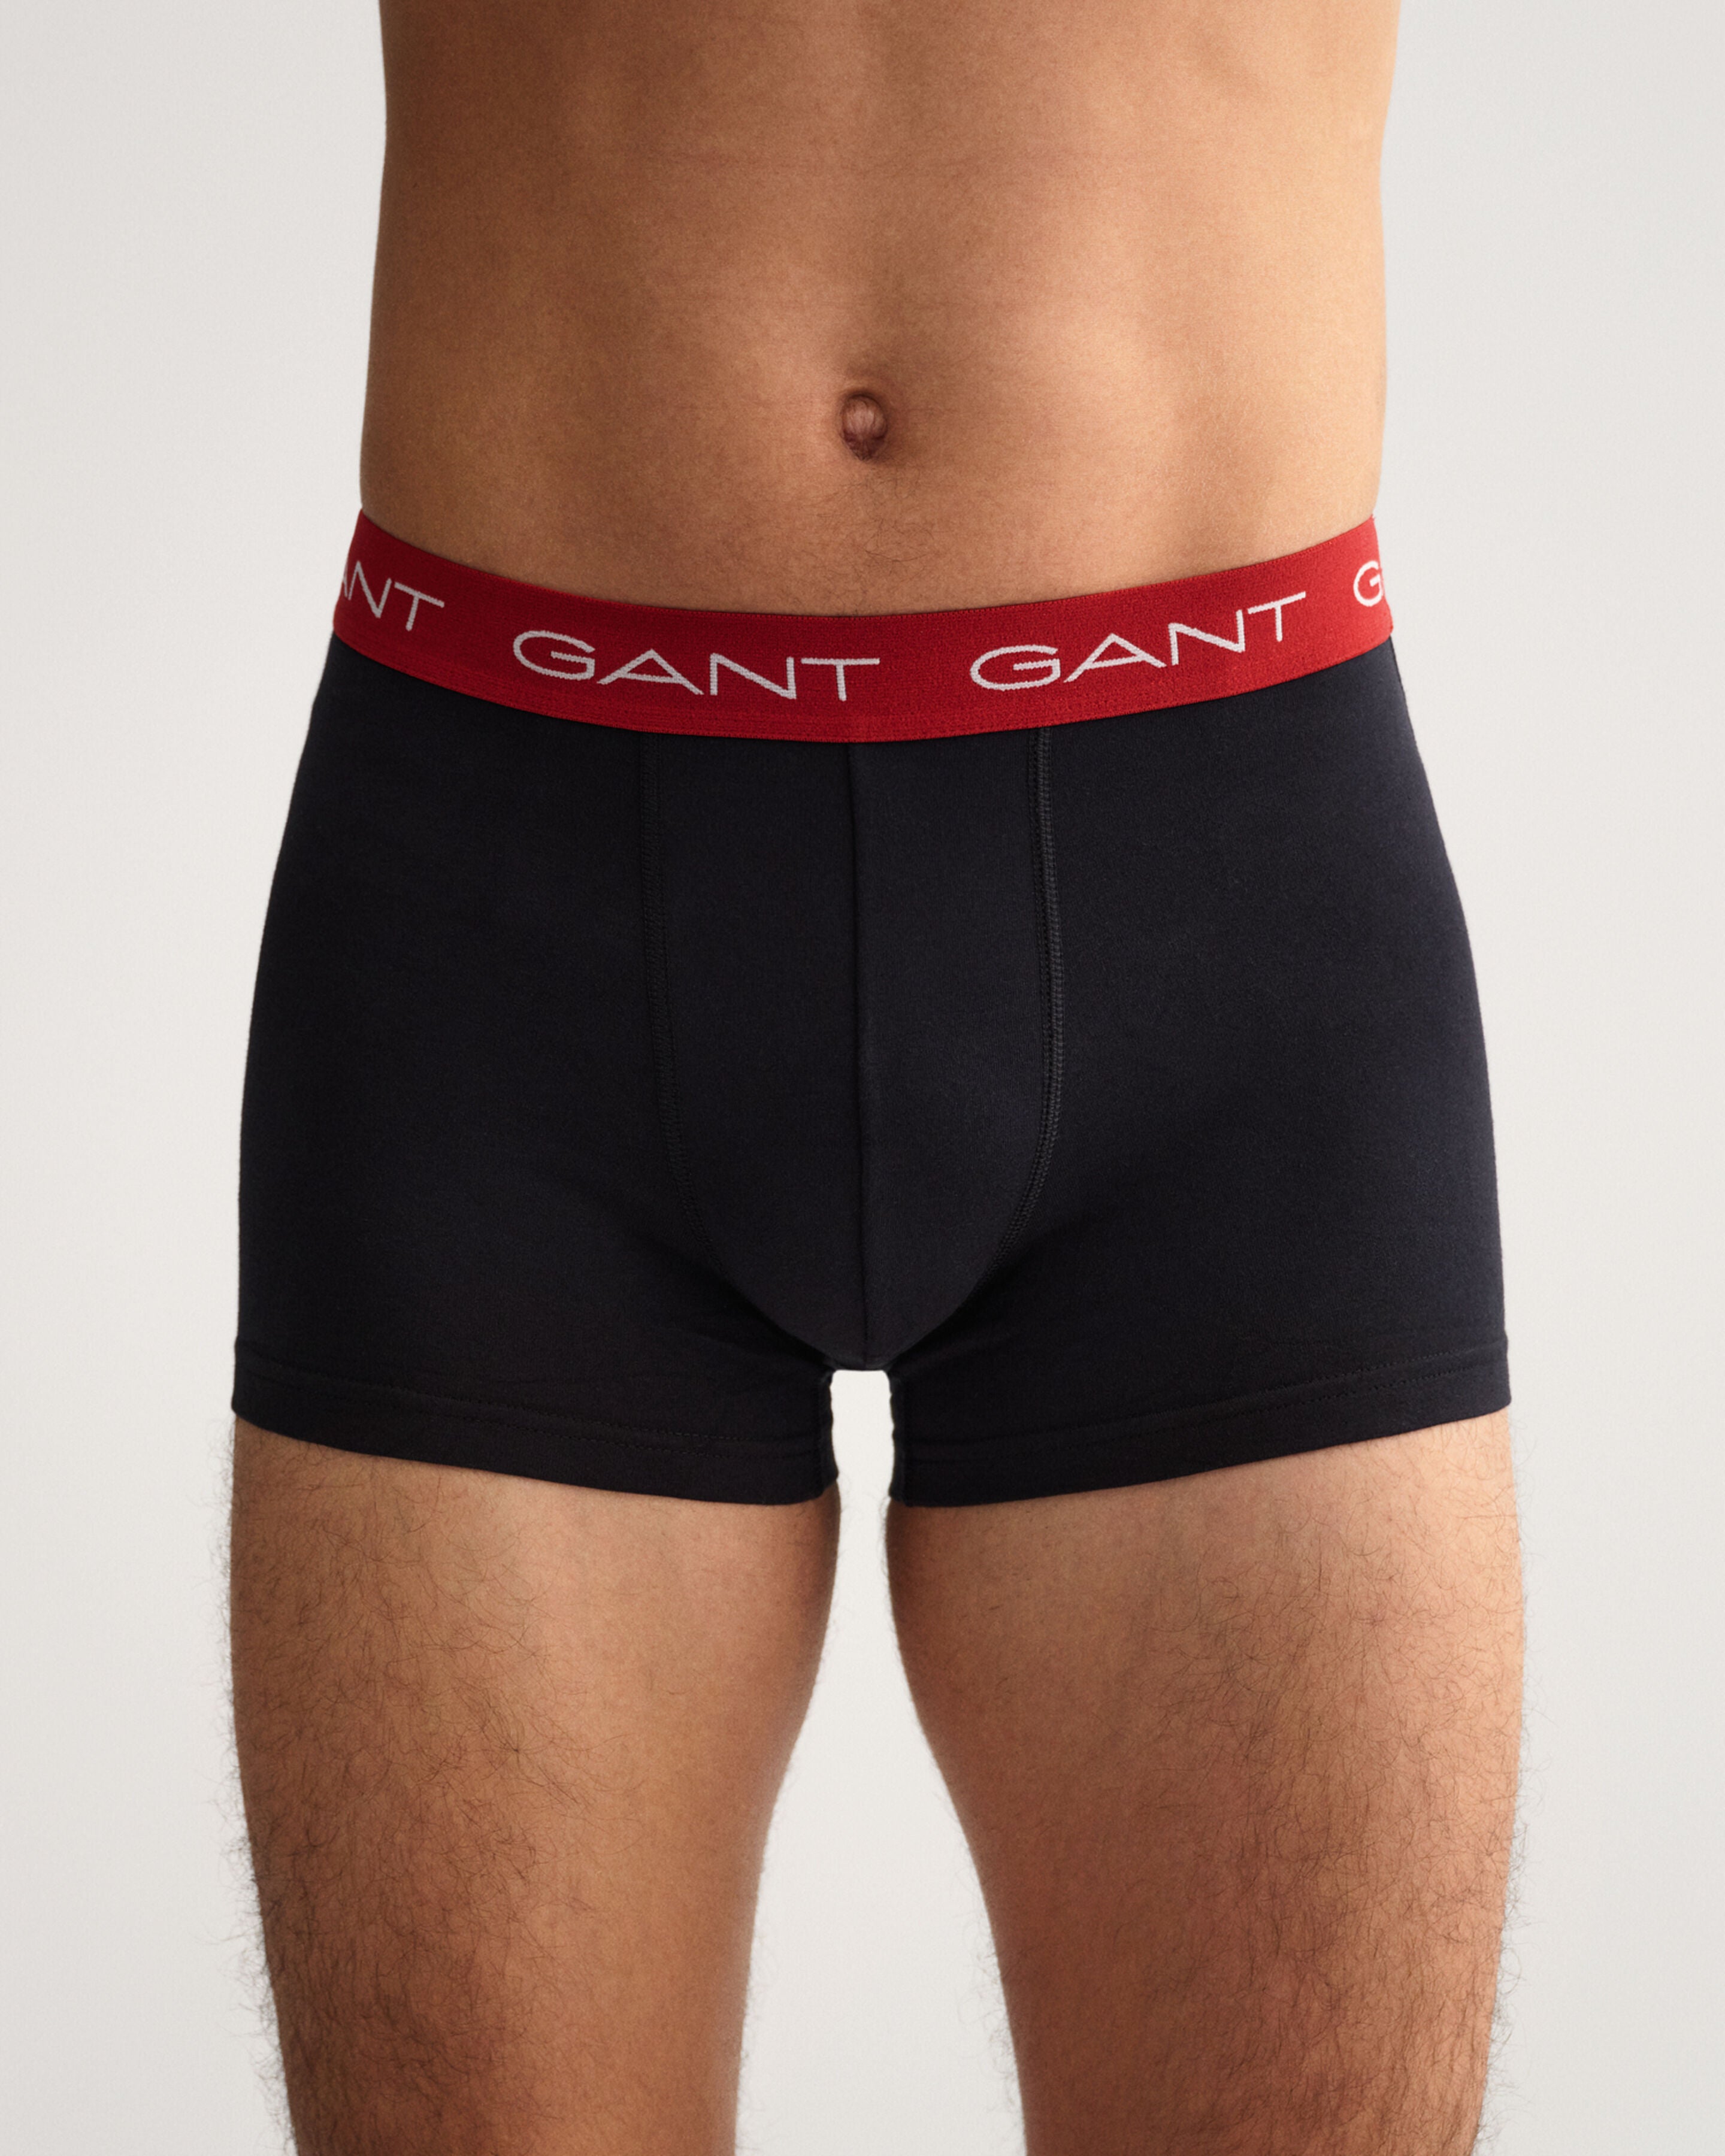 GANT - 3-Pack Trunks in Black with Contrasting Waistband 902233003 5